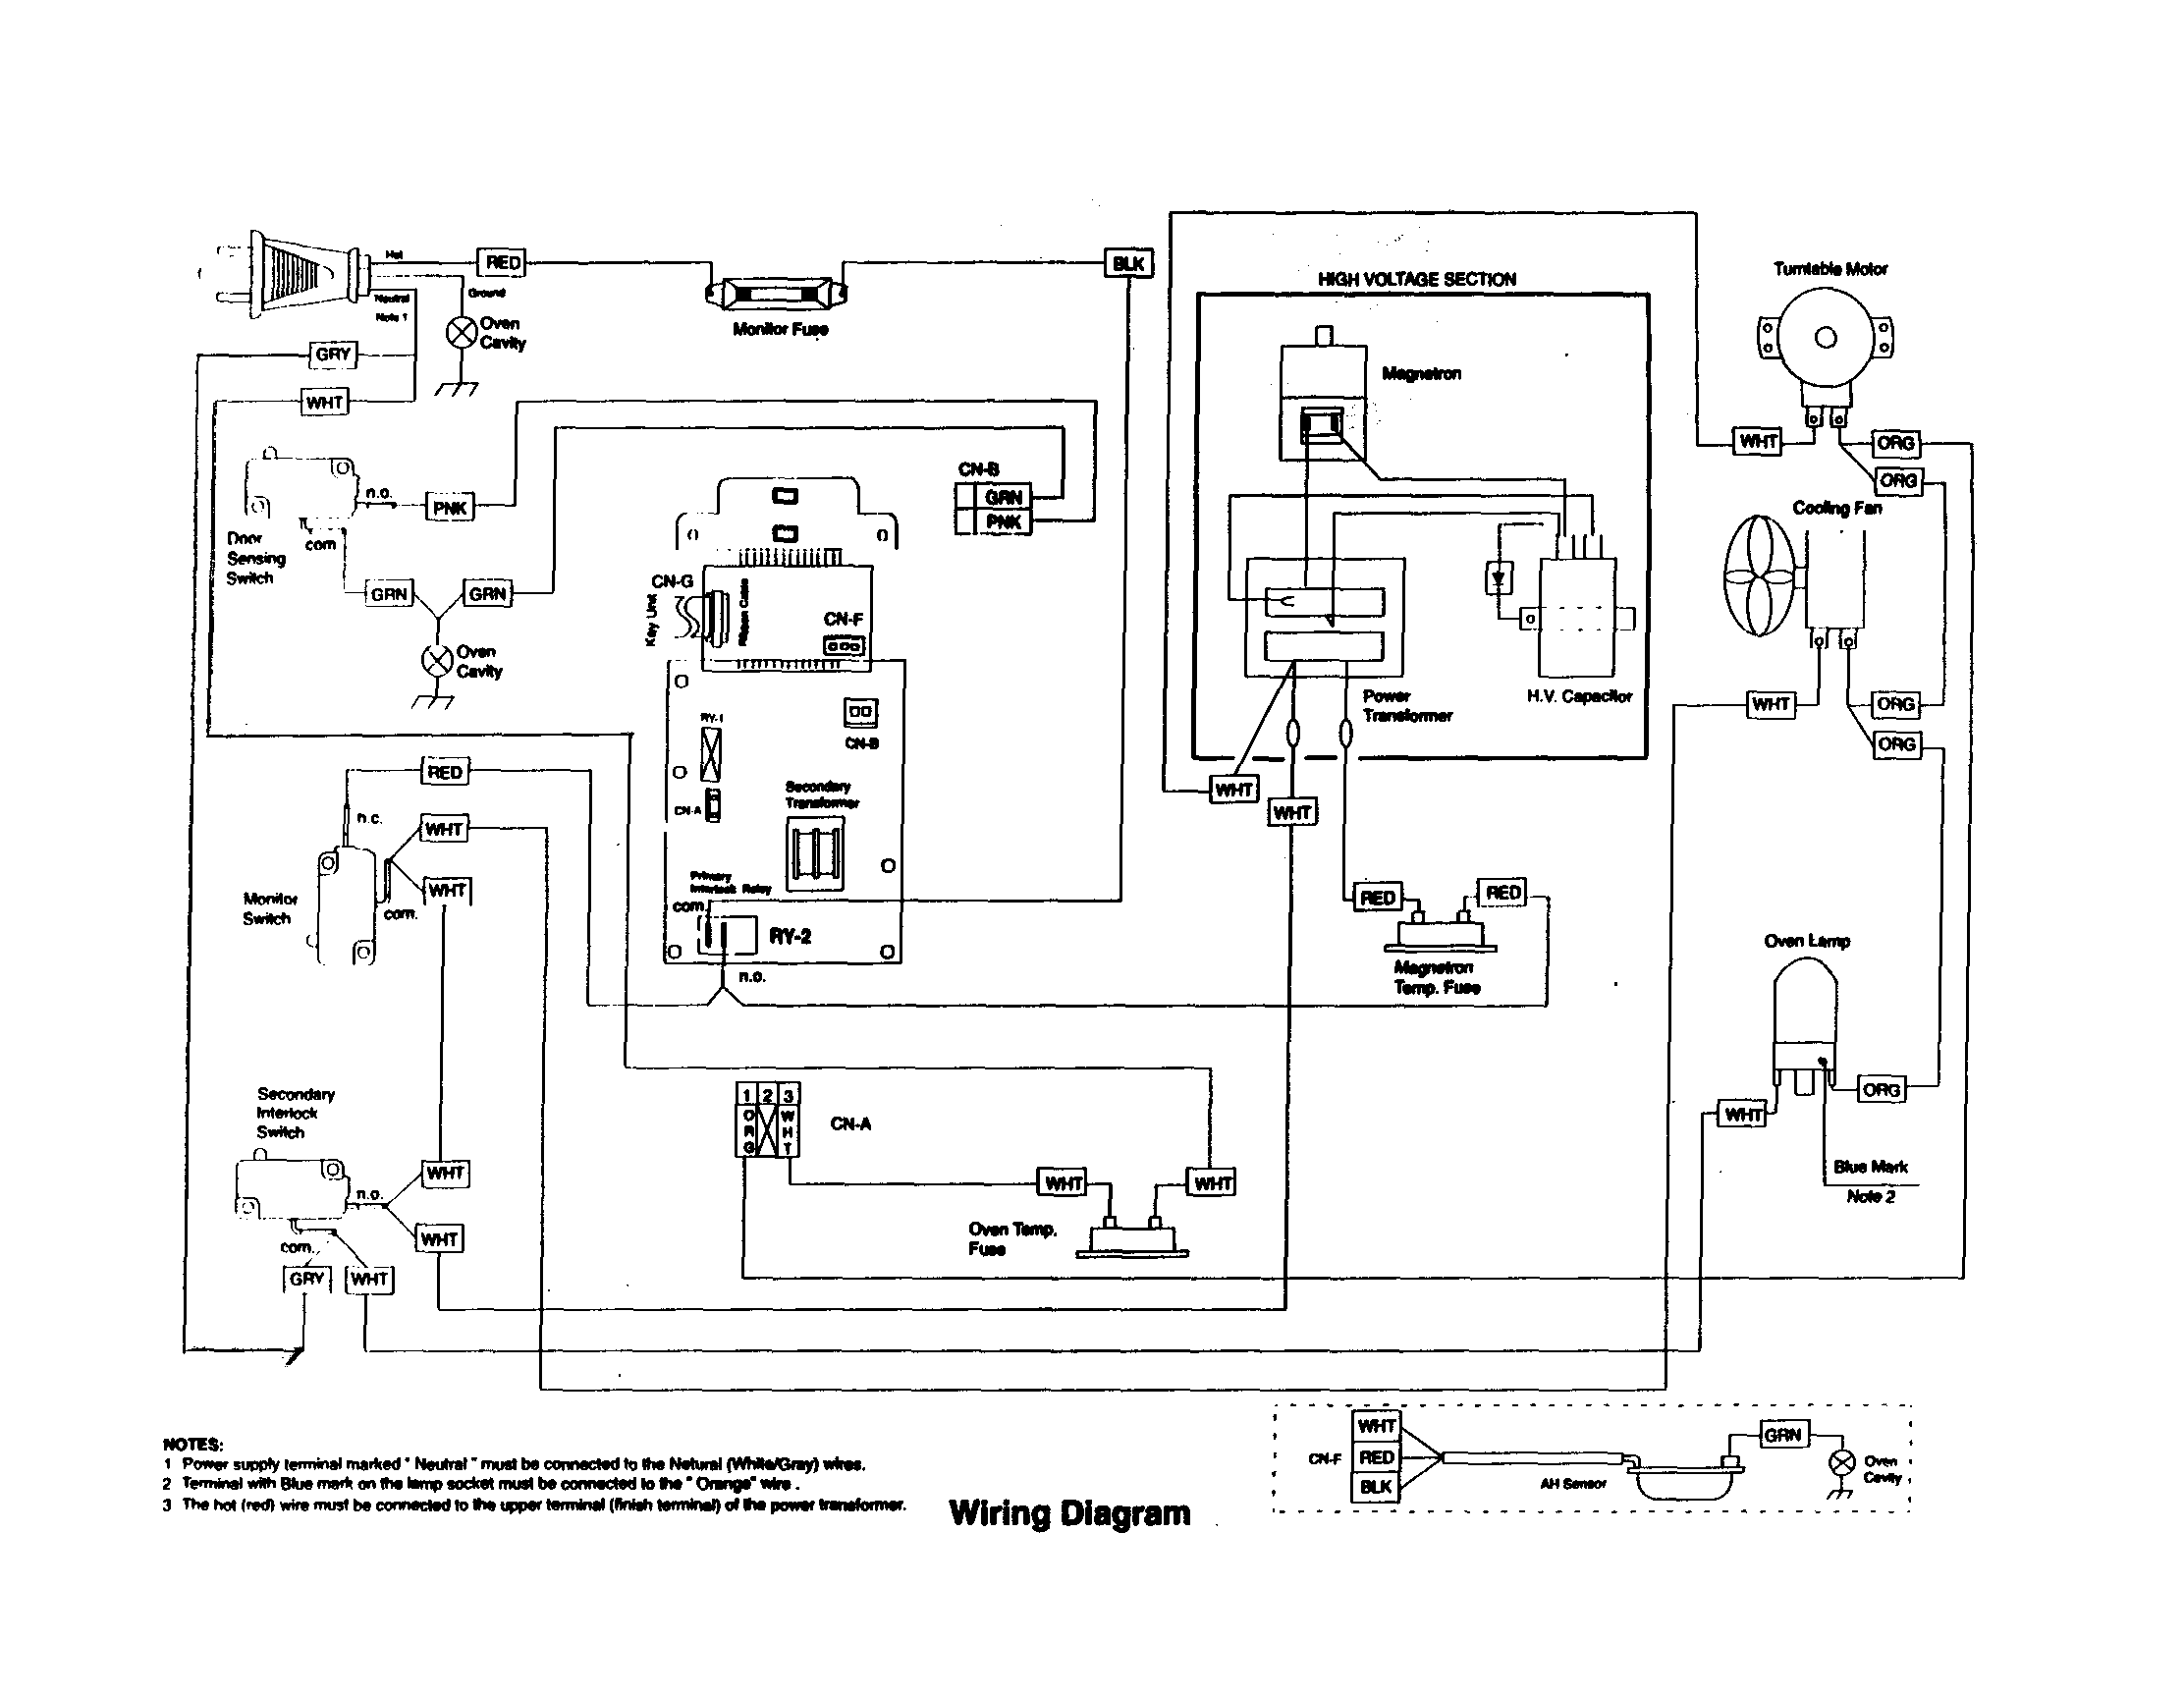 oven-wiring-diagram Images - Frompo - 1